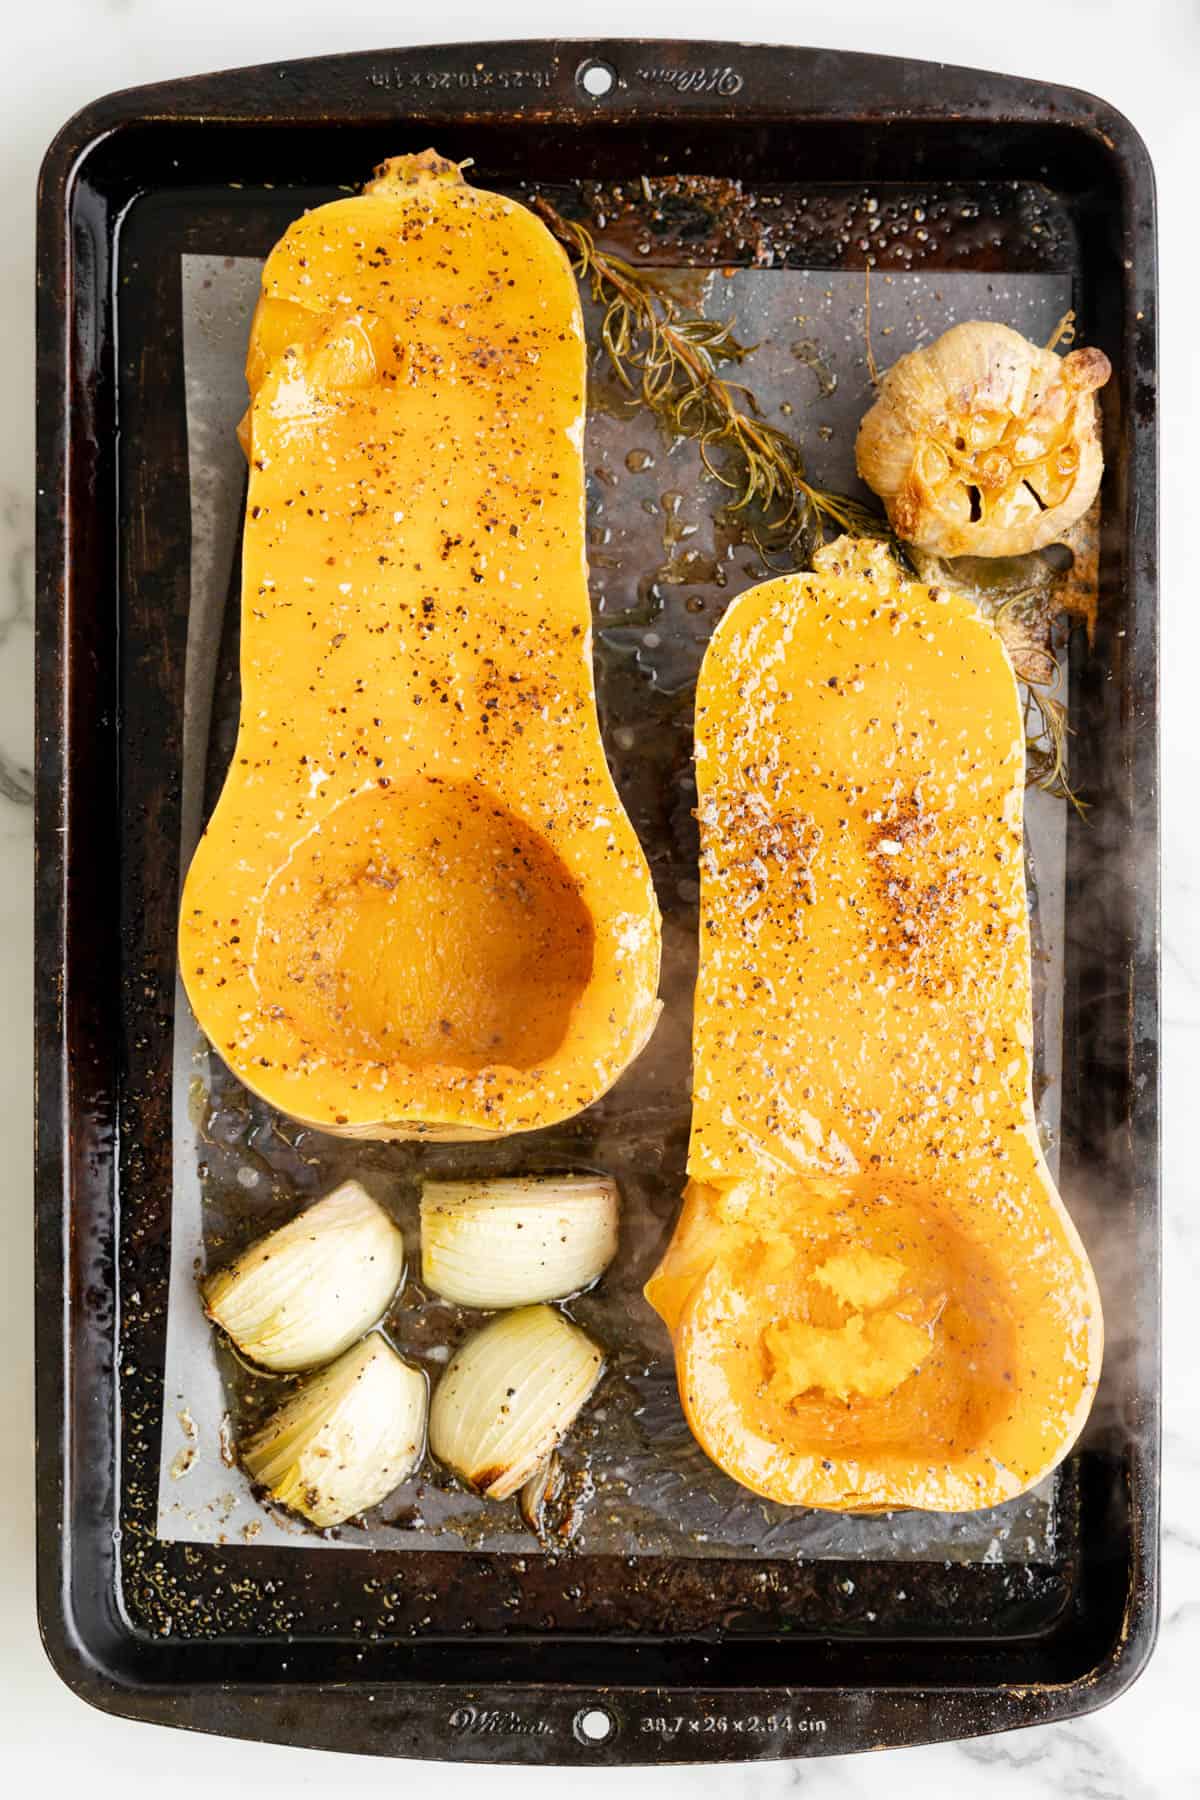 Roasted butternut squash on a pan.